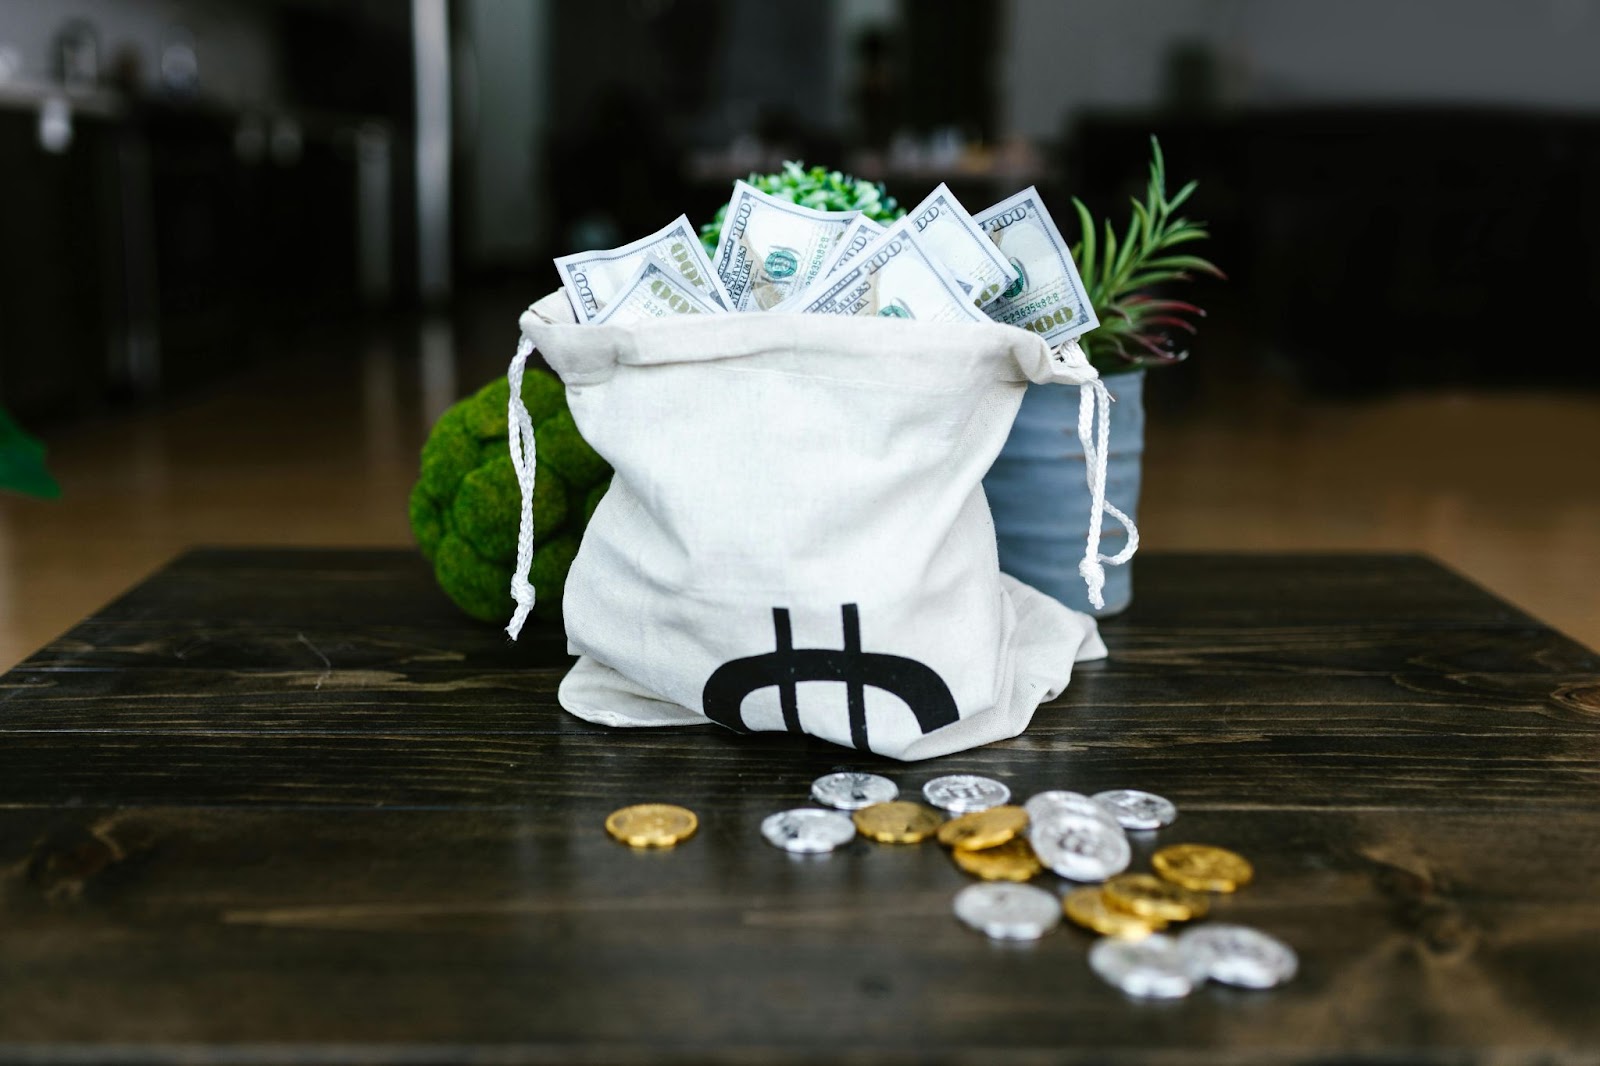 A bag full of money and currencies on the table